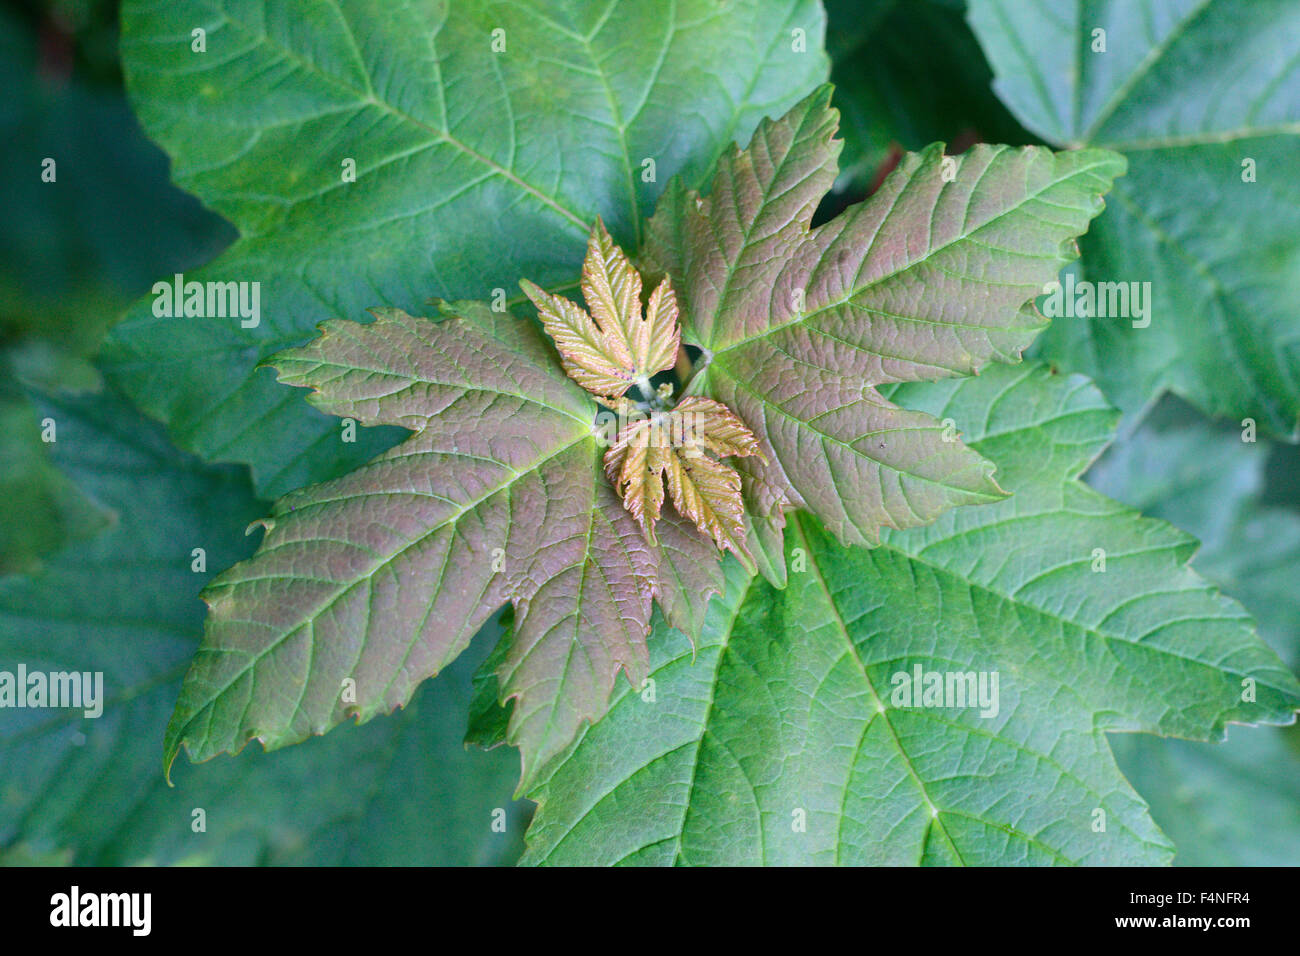 Sycamore leaves. Stock Photo